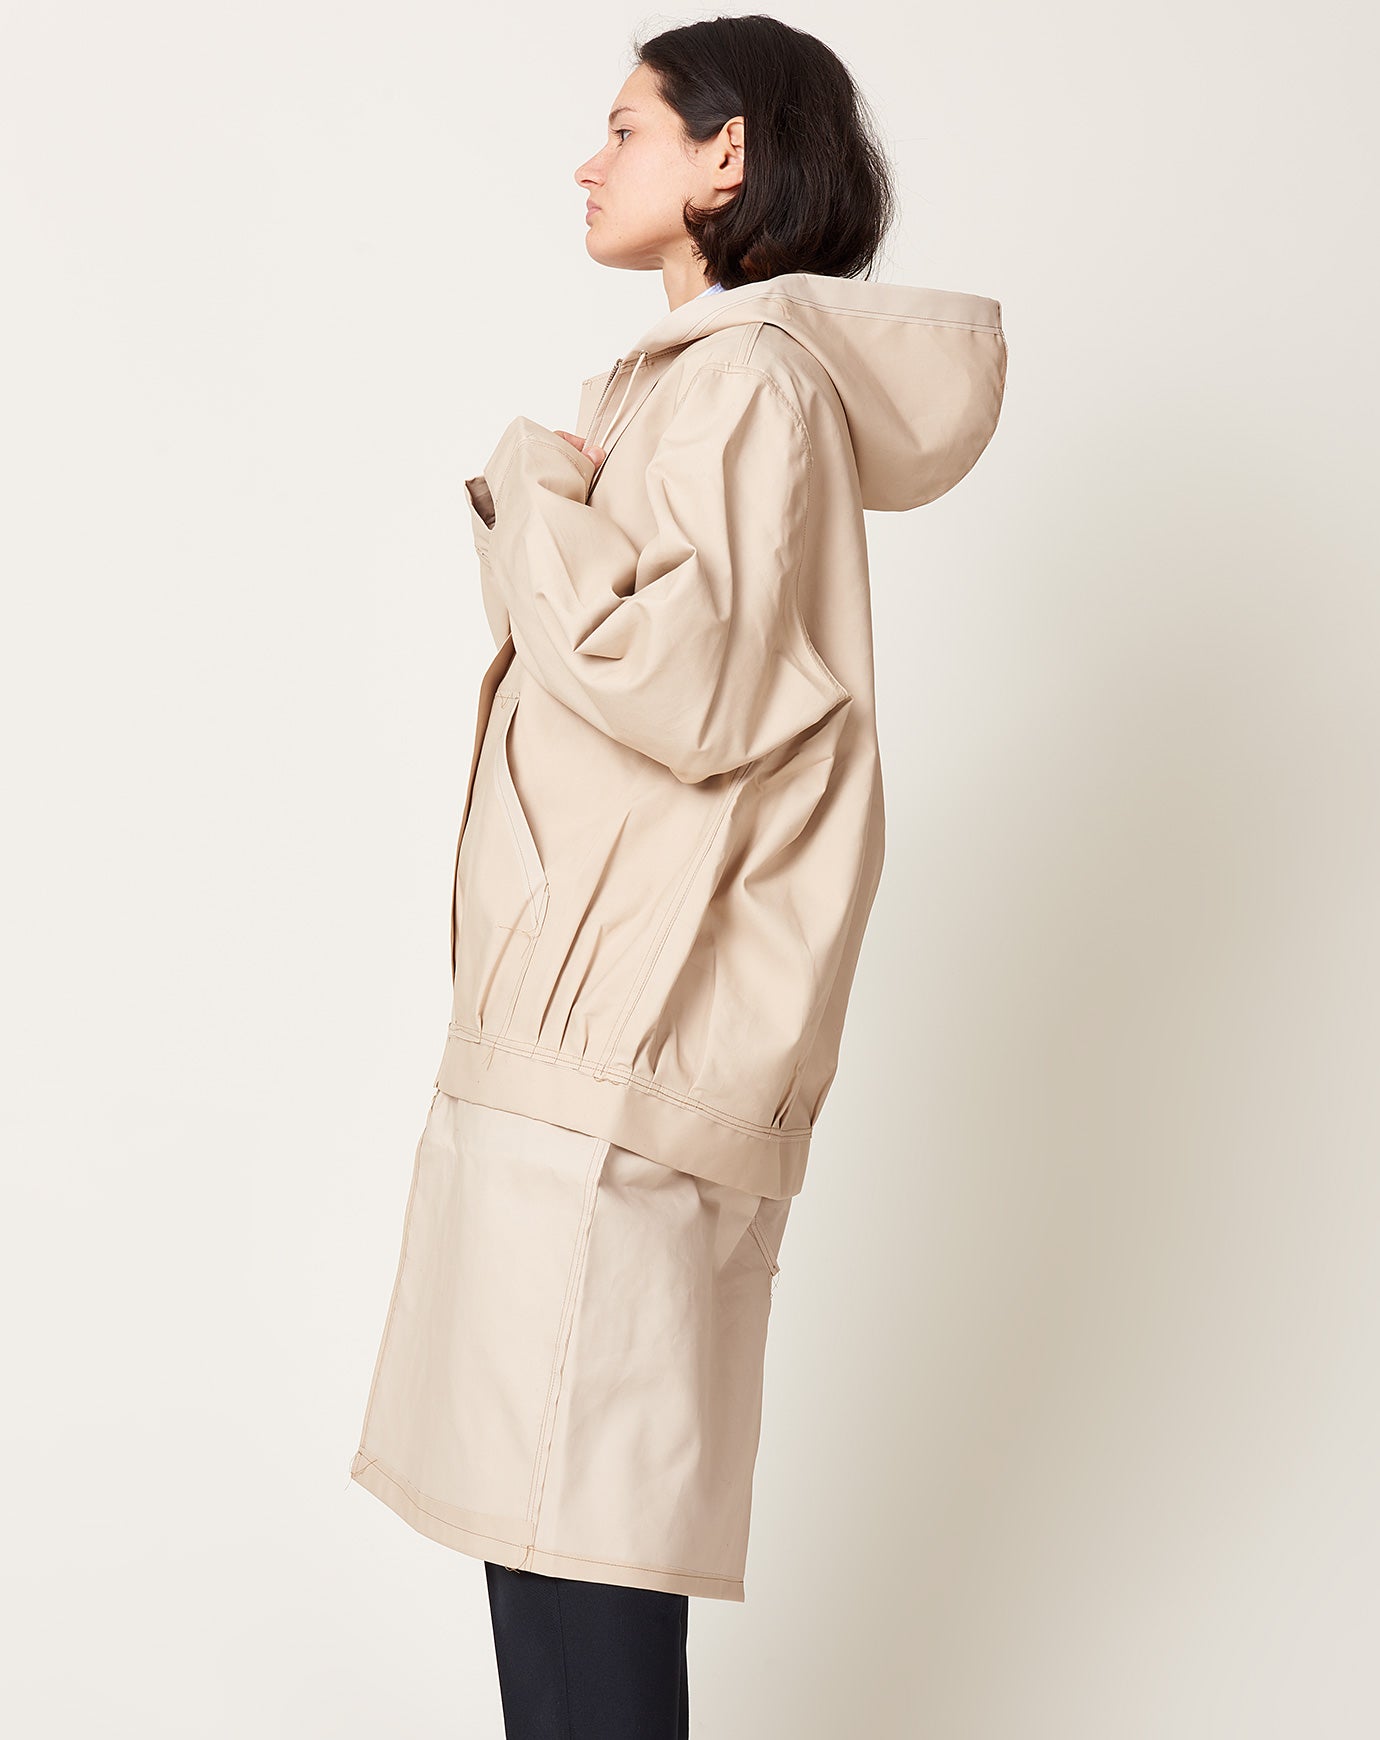 Camiel Fortgens Research Mixed Coat in Sand